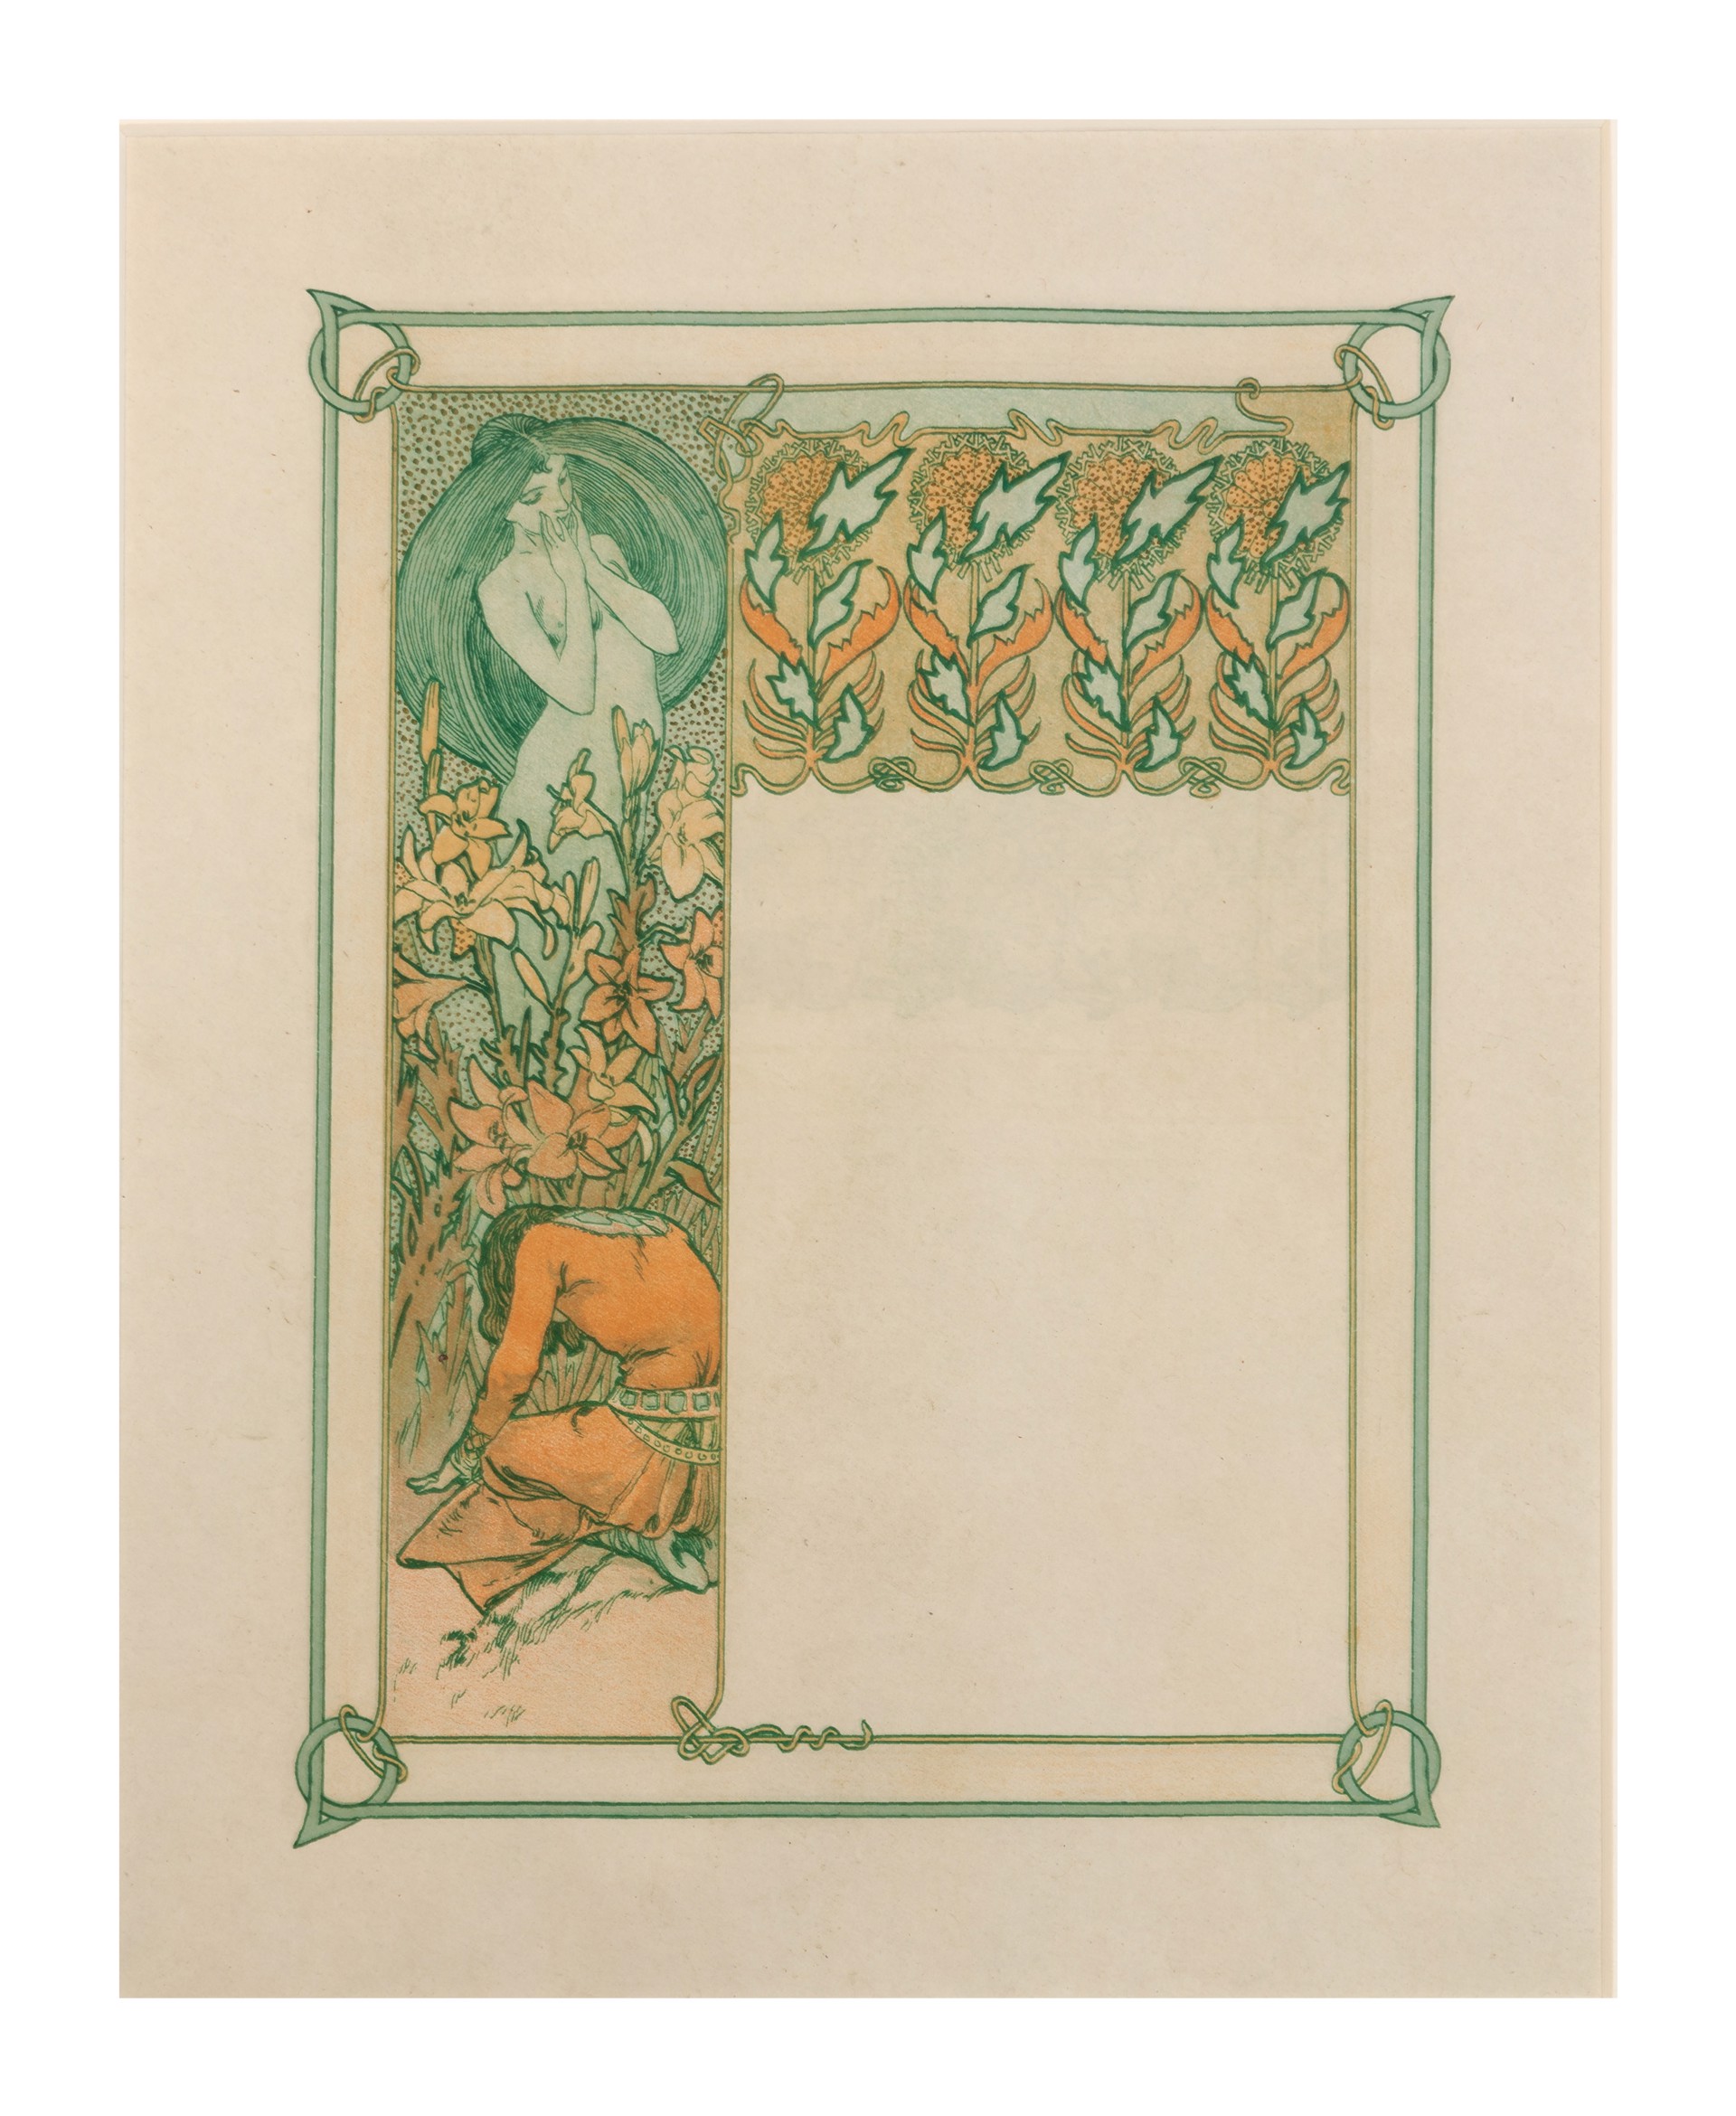 From: Ilsée, Princesse de Tripoli Recto: "A Vision" Verso: "Worried Souls" by Alphonse Mucha